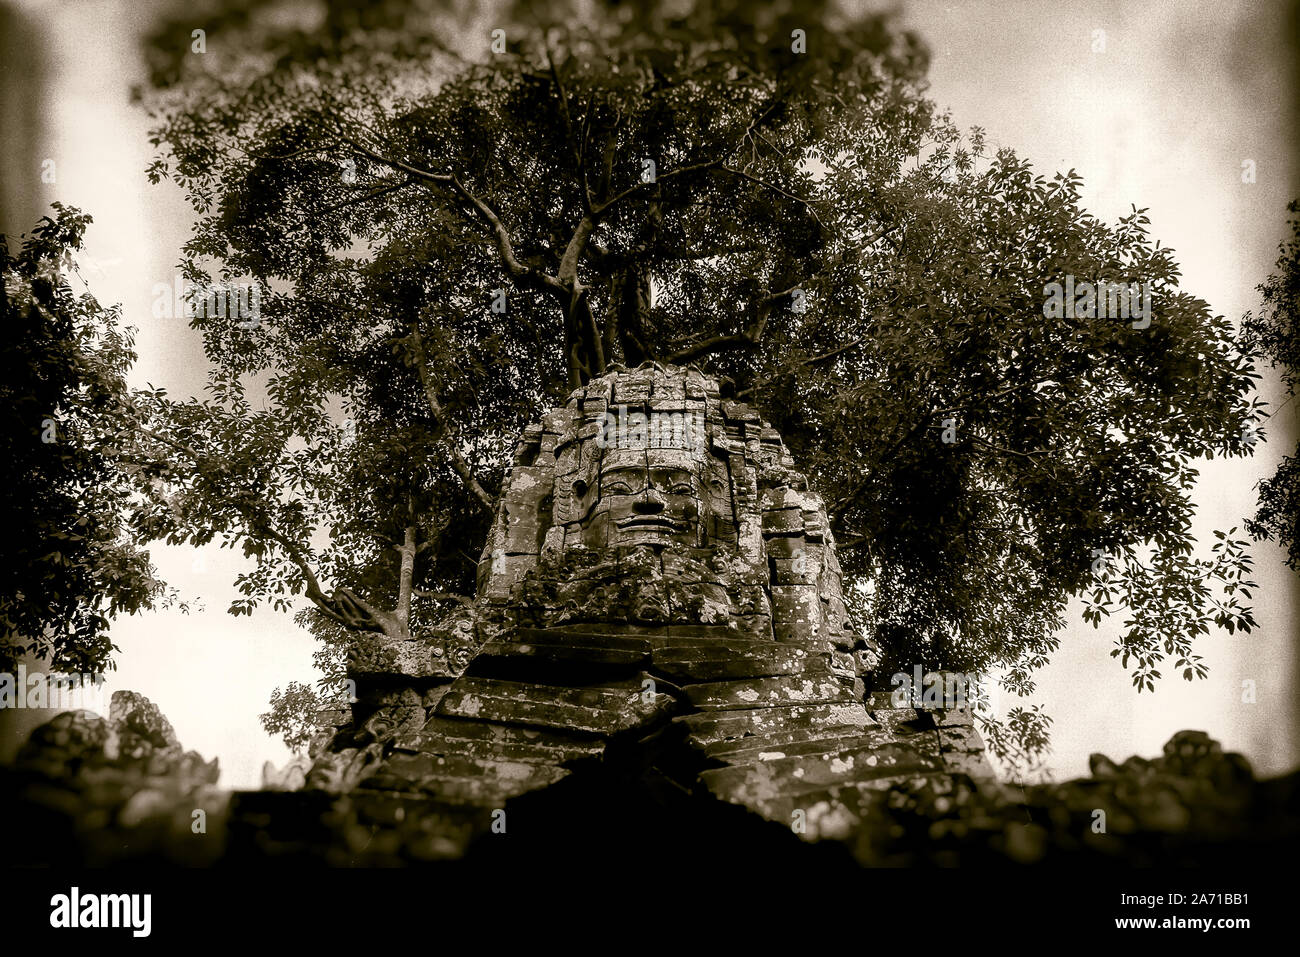 Cambodia, Angkor, Ta Som jungle temple: a face carved in stone under a tree in the Ta Som jungle temple in Angkor Archeological area. Stock Photo